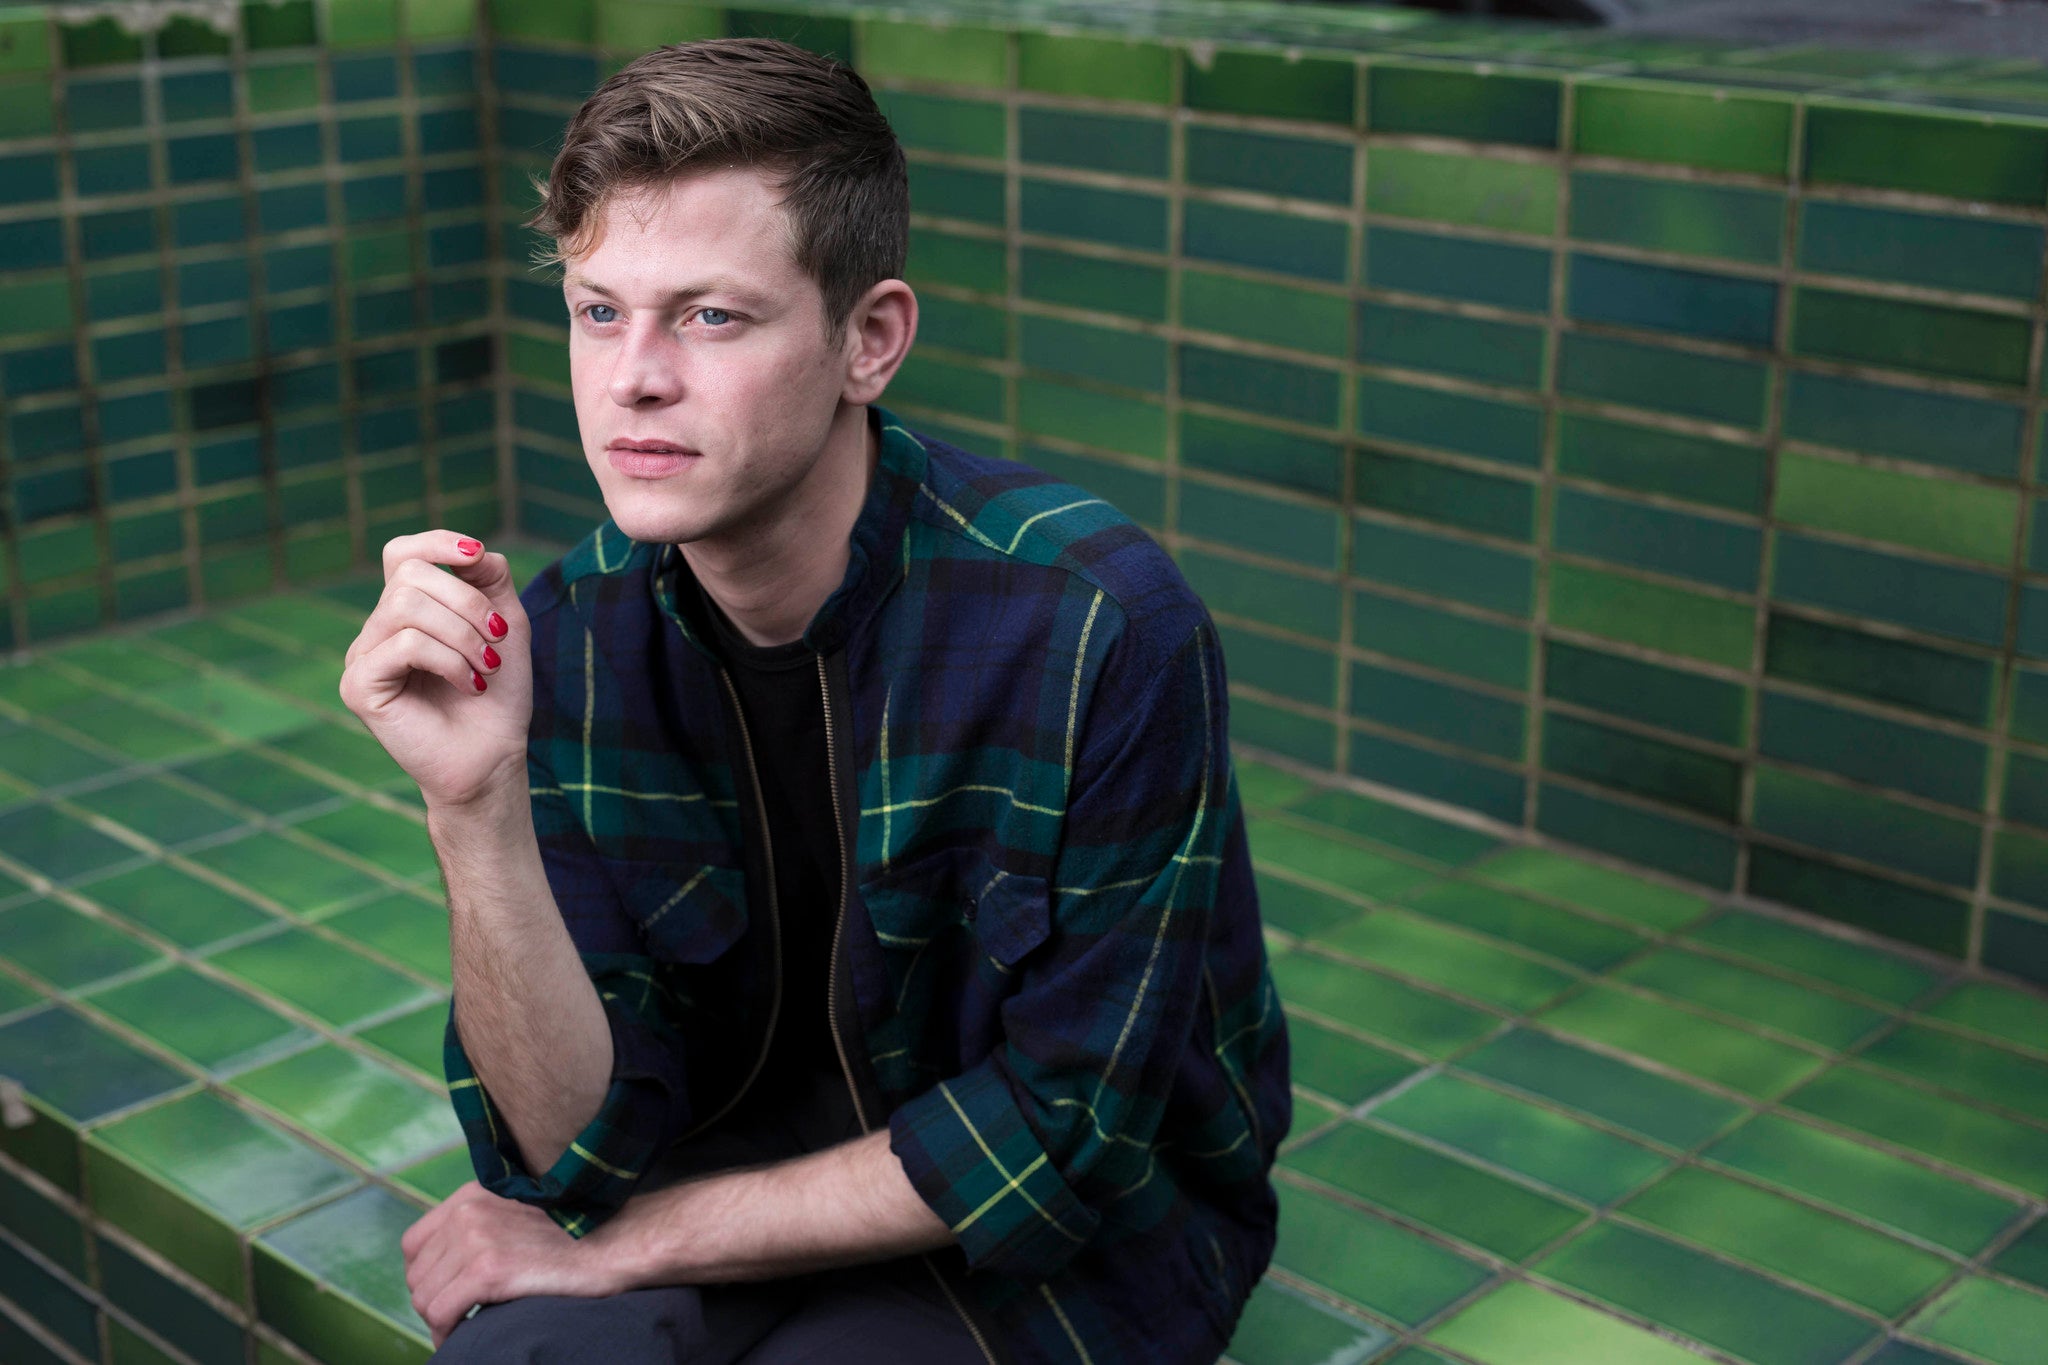 Singer/Songwriter, Perfume Genius, aka Mike Hadreas, pictured in Shoreditch, London.